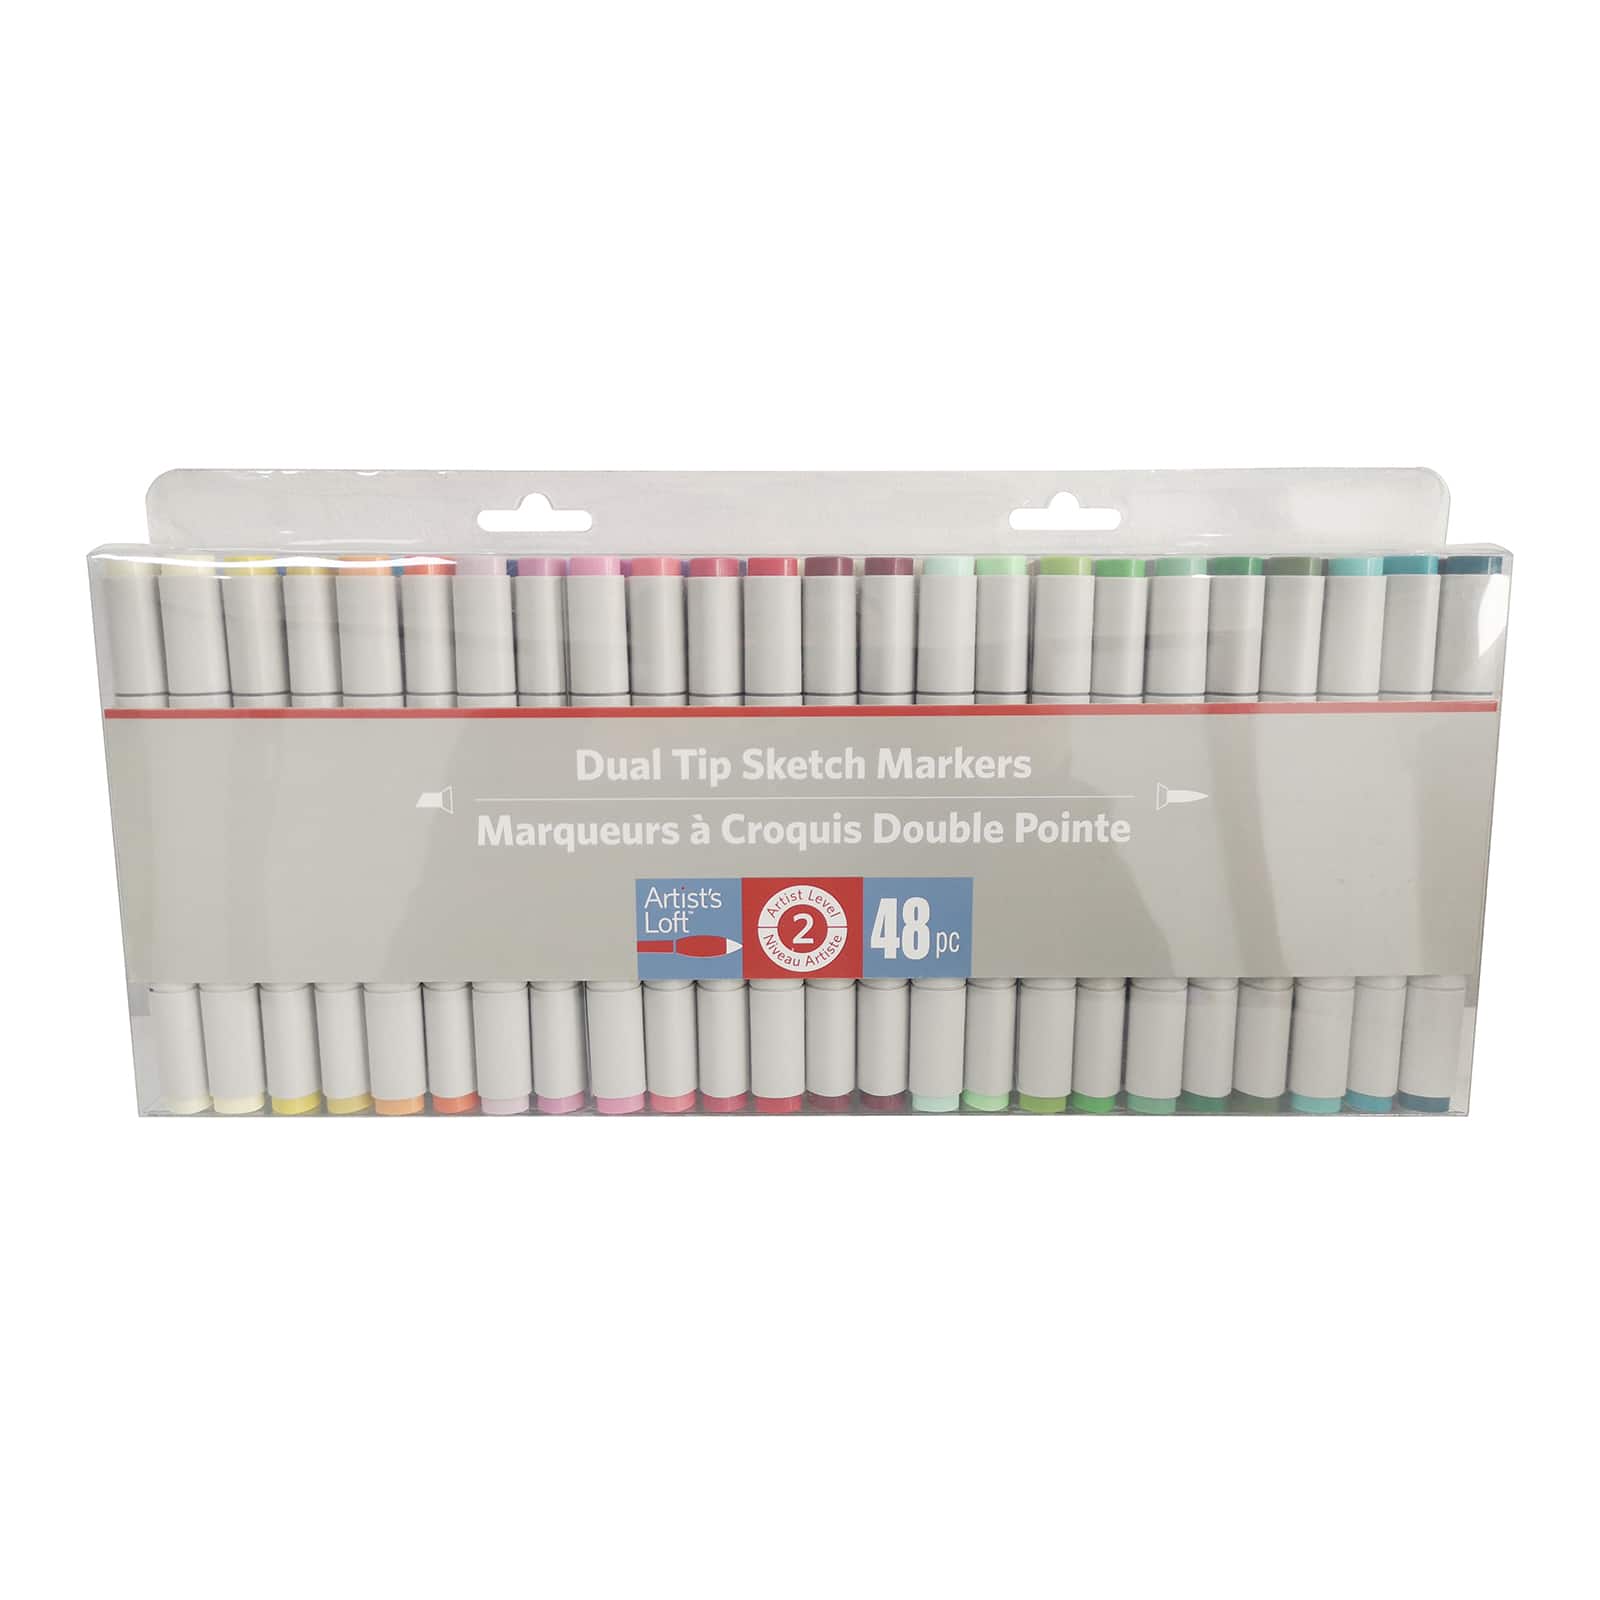 Artist's Loft- Dual Tip Sketch Markers - Primary Colors 6pc. *NEW